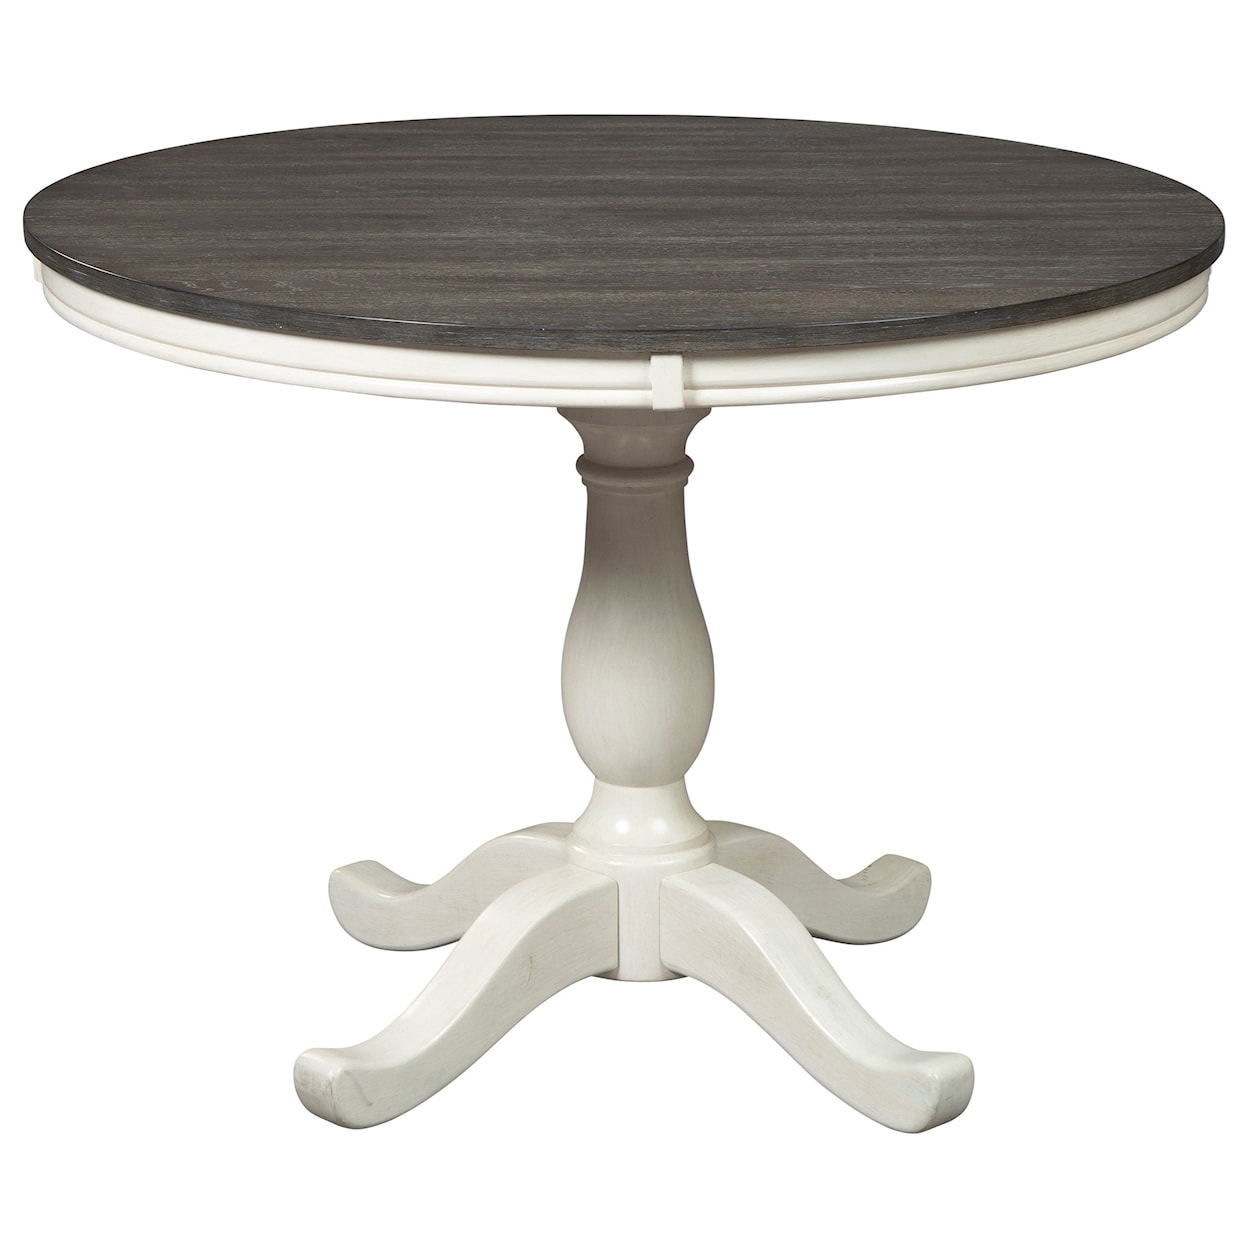 Signature Design by Ashley Furniture Nelling 3-Piece Round Dining Table Set